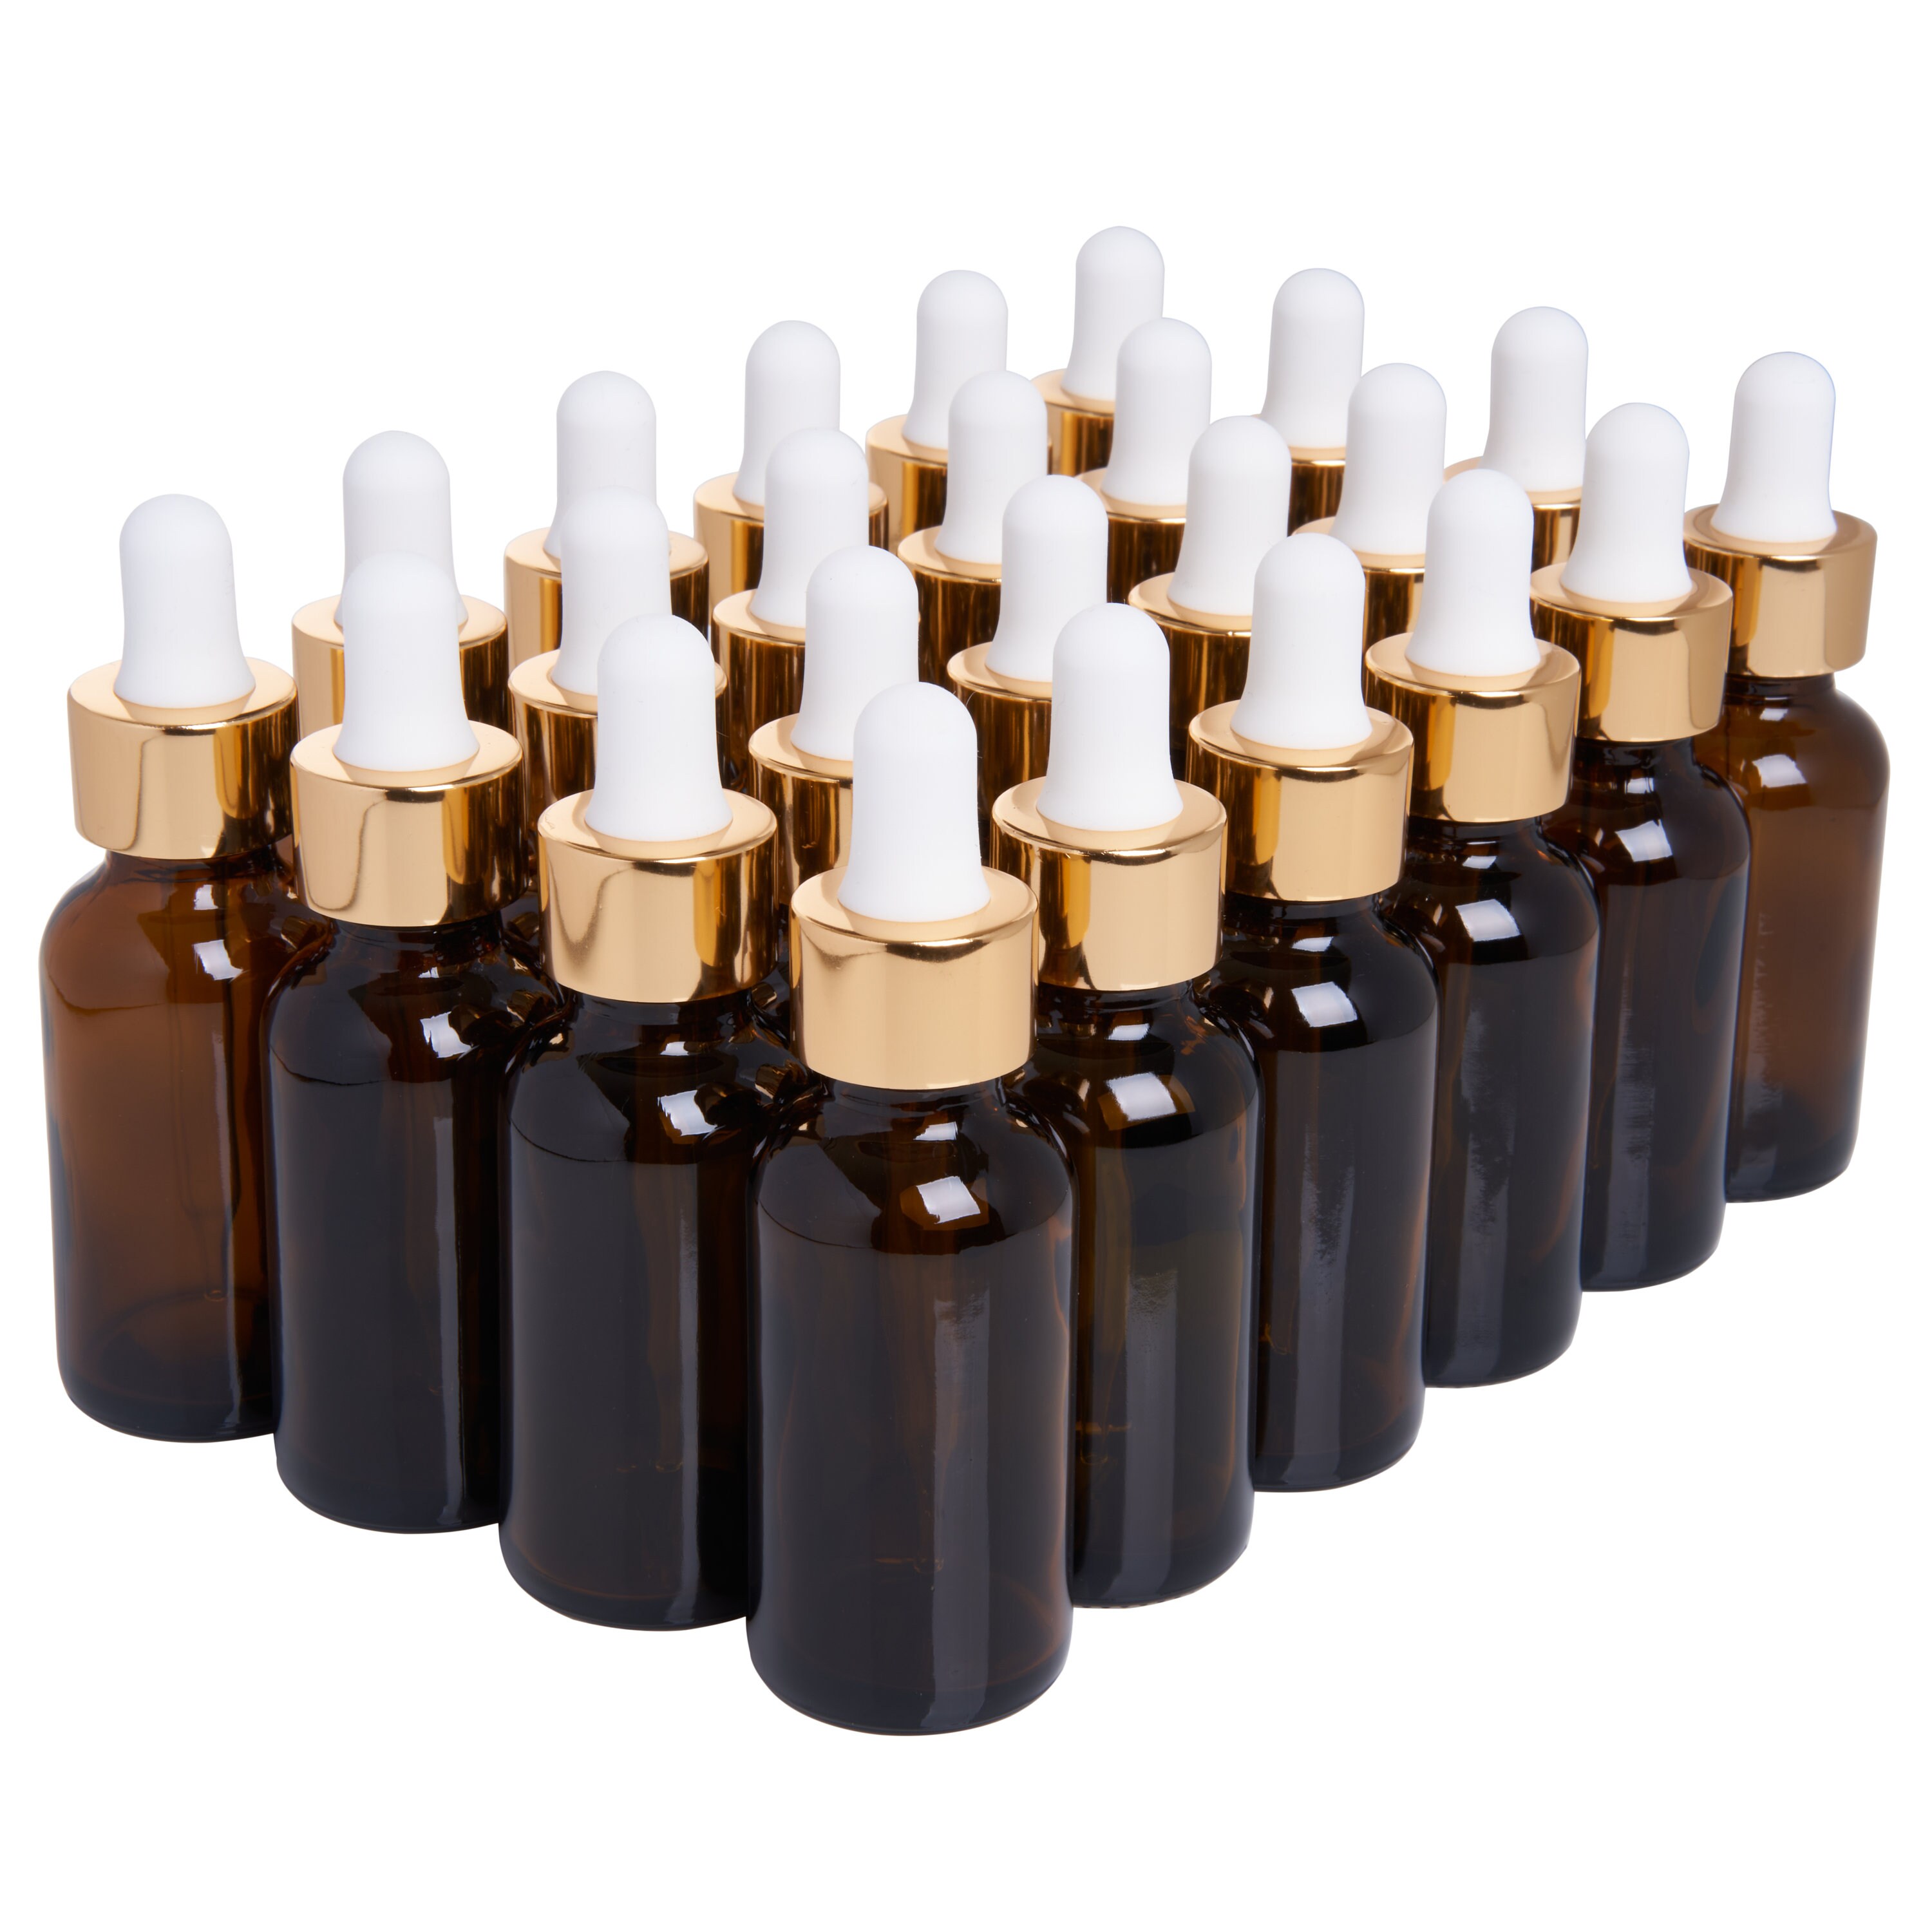 DropperStop 1oz Amber Glass Dropper Bottles (30mL) with Tapered Glass  Droppers - Pack of 2